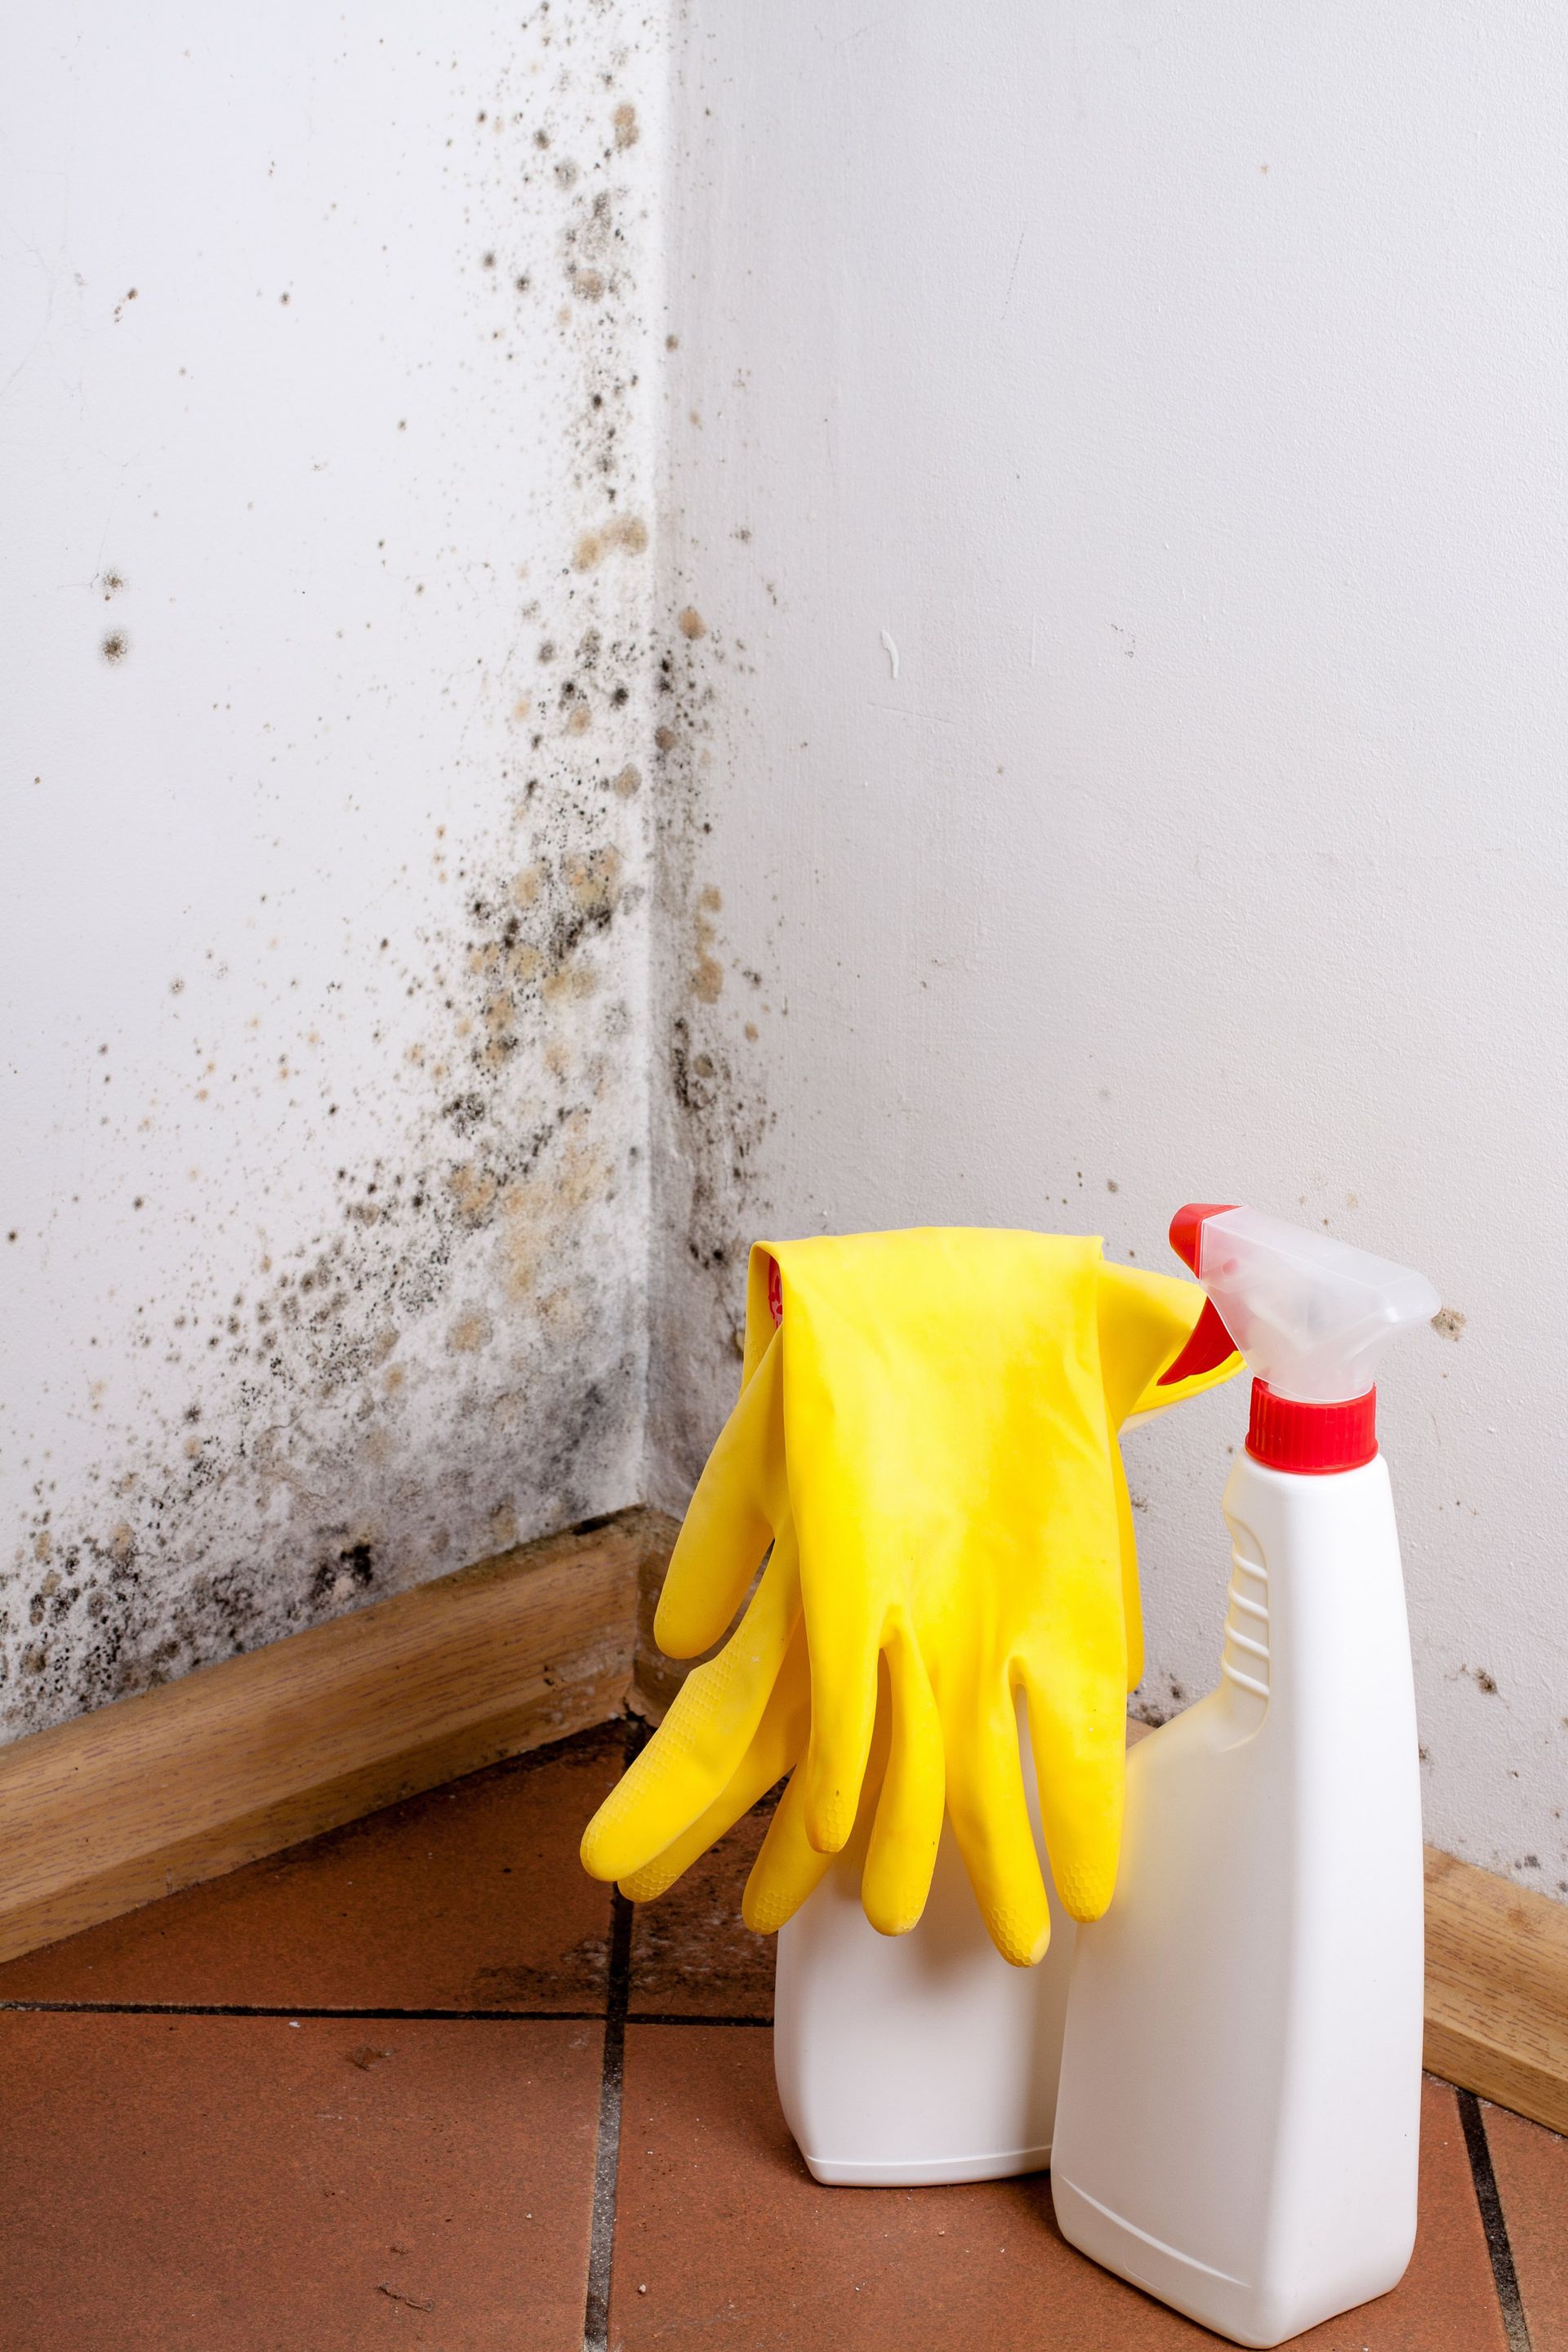 a pair of yellow rubber gloves and a spray bottle are sitting on the floor in front of a mouldy wall .